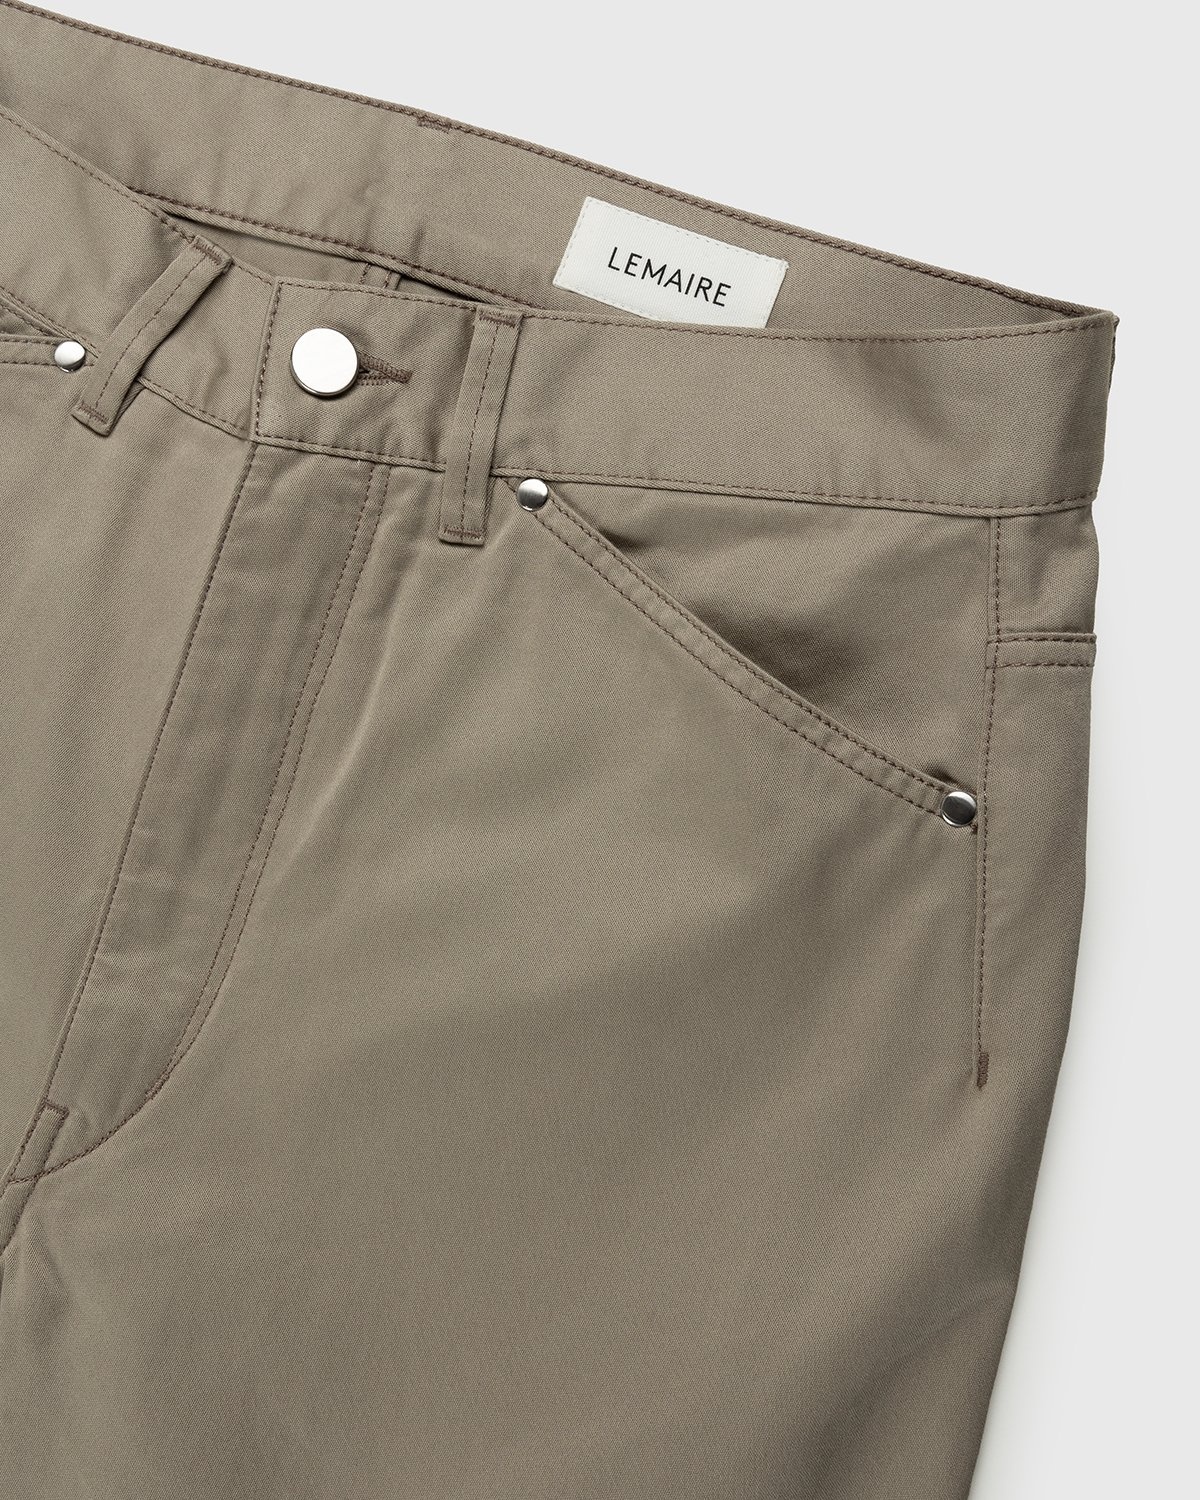 Lemaire – Seamless Pants Light Taupe - Pants - Beige - Image 4